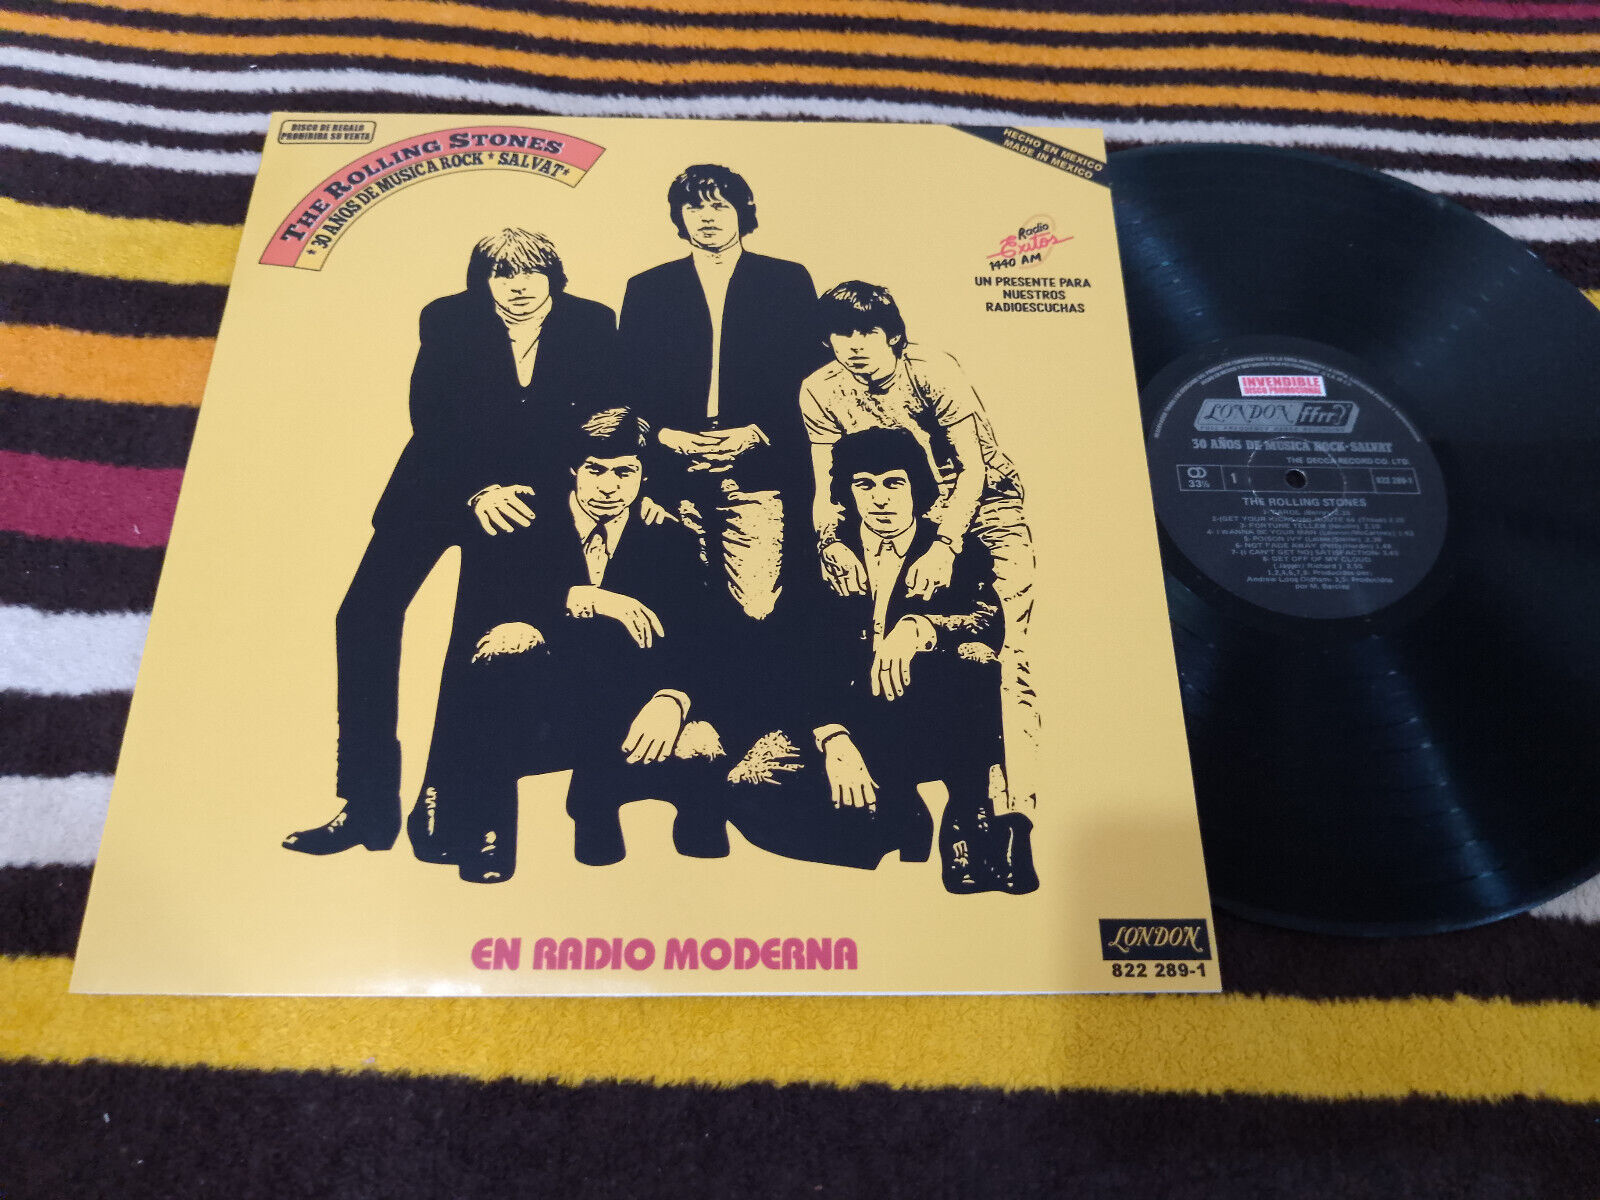 THE ROLLING STONES "SALVAT" LP NICE PS MEXICO VG+ MEXICAN PROMO